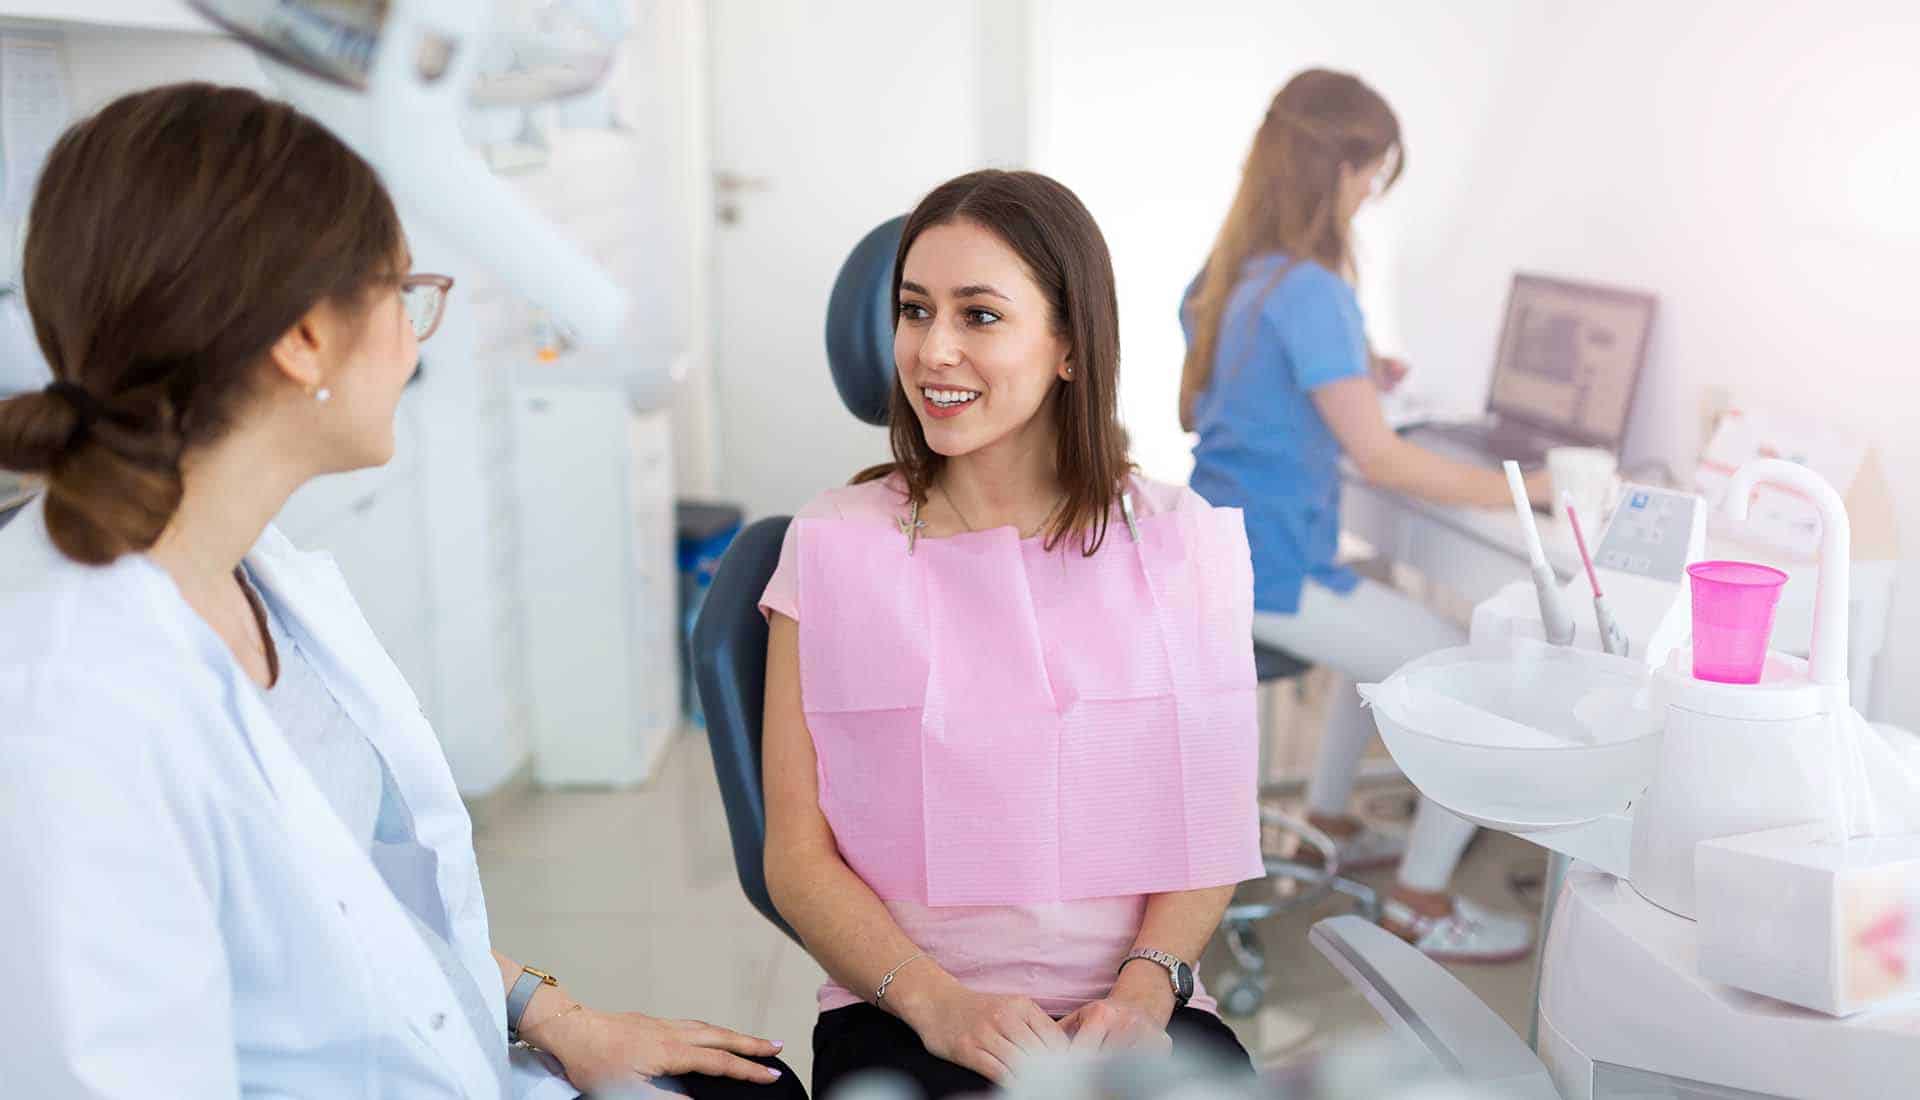 Dentist Services in Kansas City, MO: Your Comprehensive Guide to Dental Care